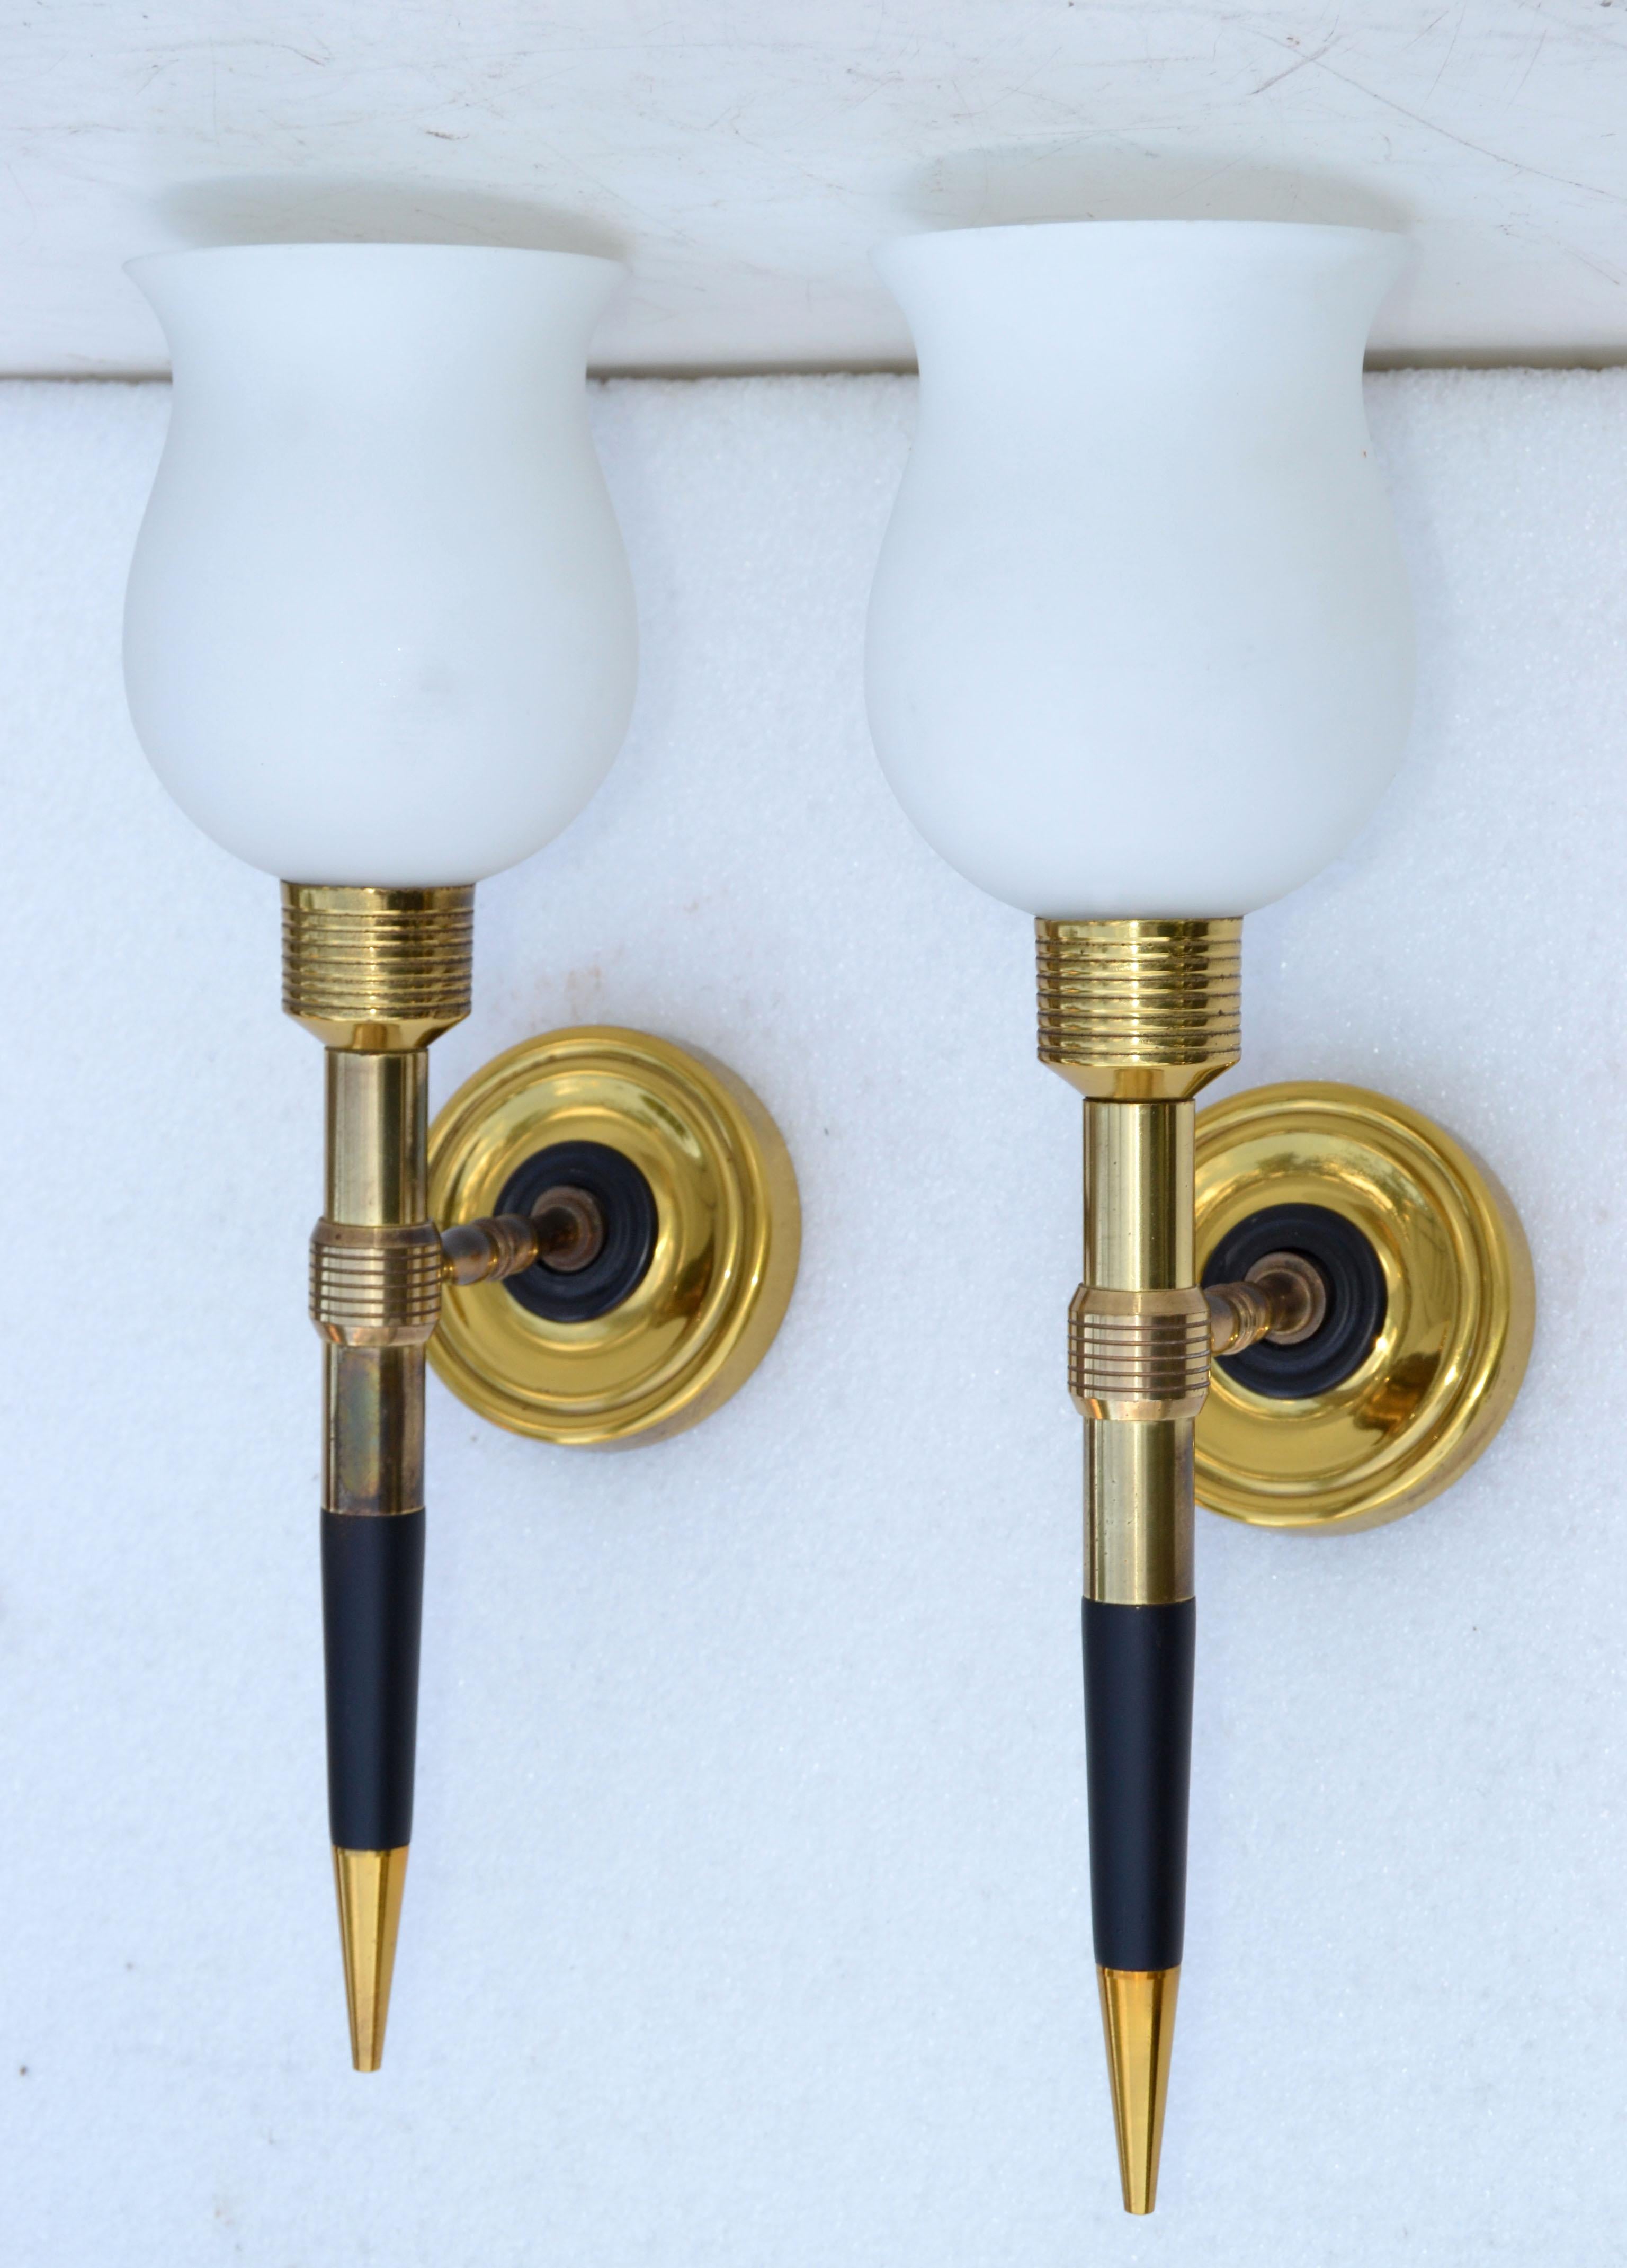 Superb pair of Maison Lancel sconces, wall lamps in Brass and black lacquered wood.
Each comes with the blown original Opaline Glass Shade, 2 sizes available.
US rewiring and each takes one light bulb with max 60 watts or LED.
Dimension without